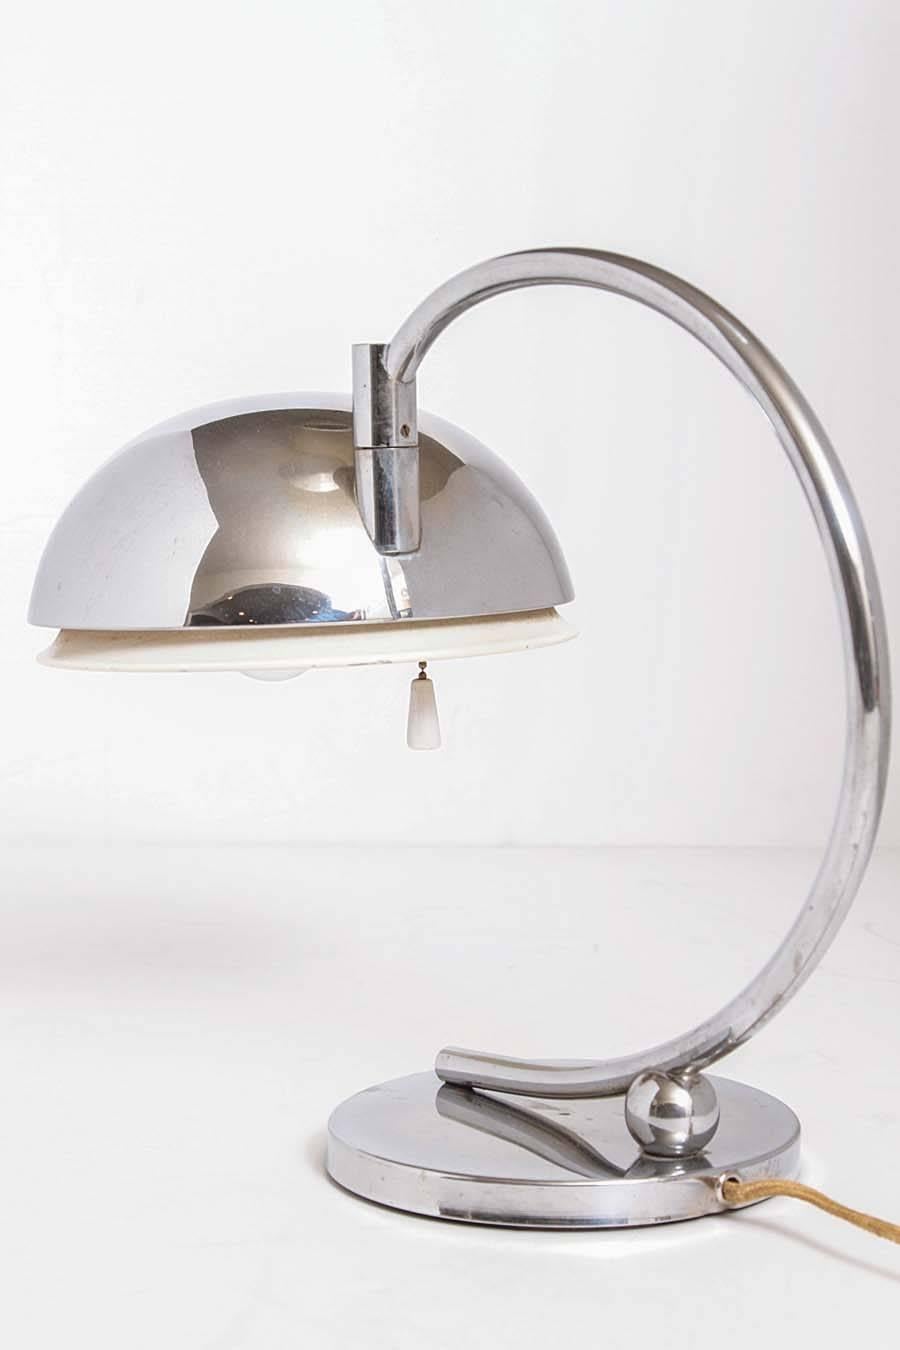 Streamline American Art Deco Machine Age Articulating Table Lamp In Good Condition For Sale In Dallas, TX